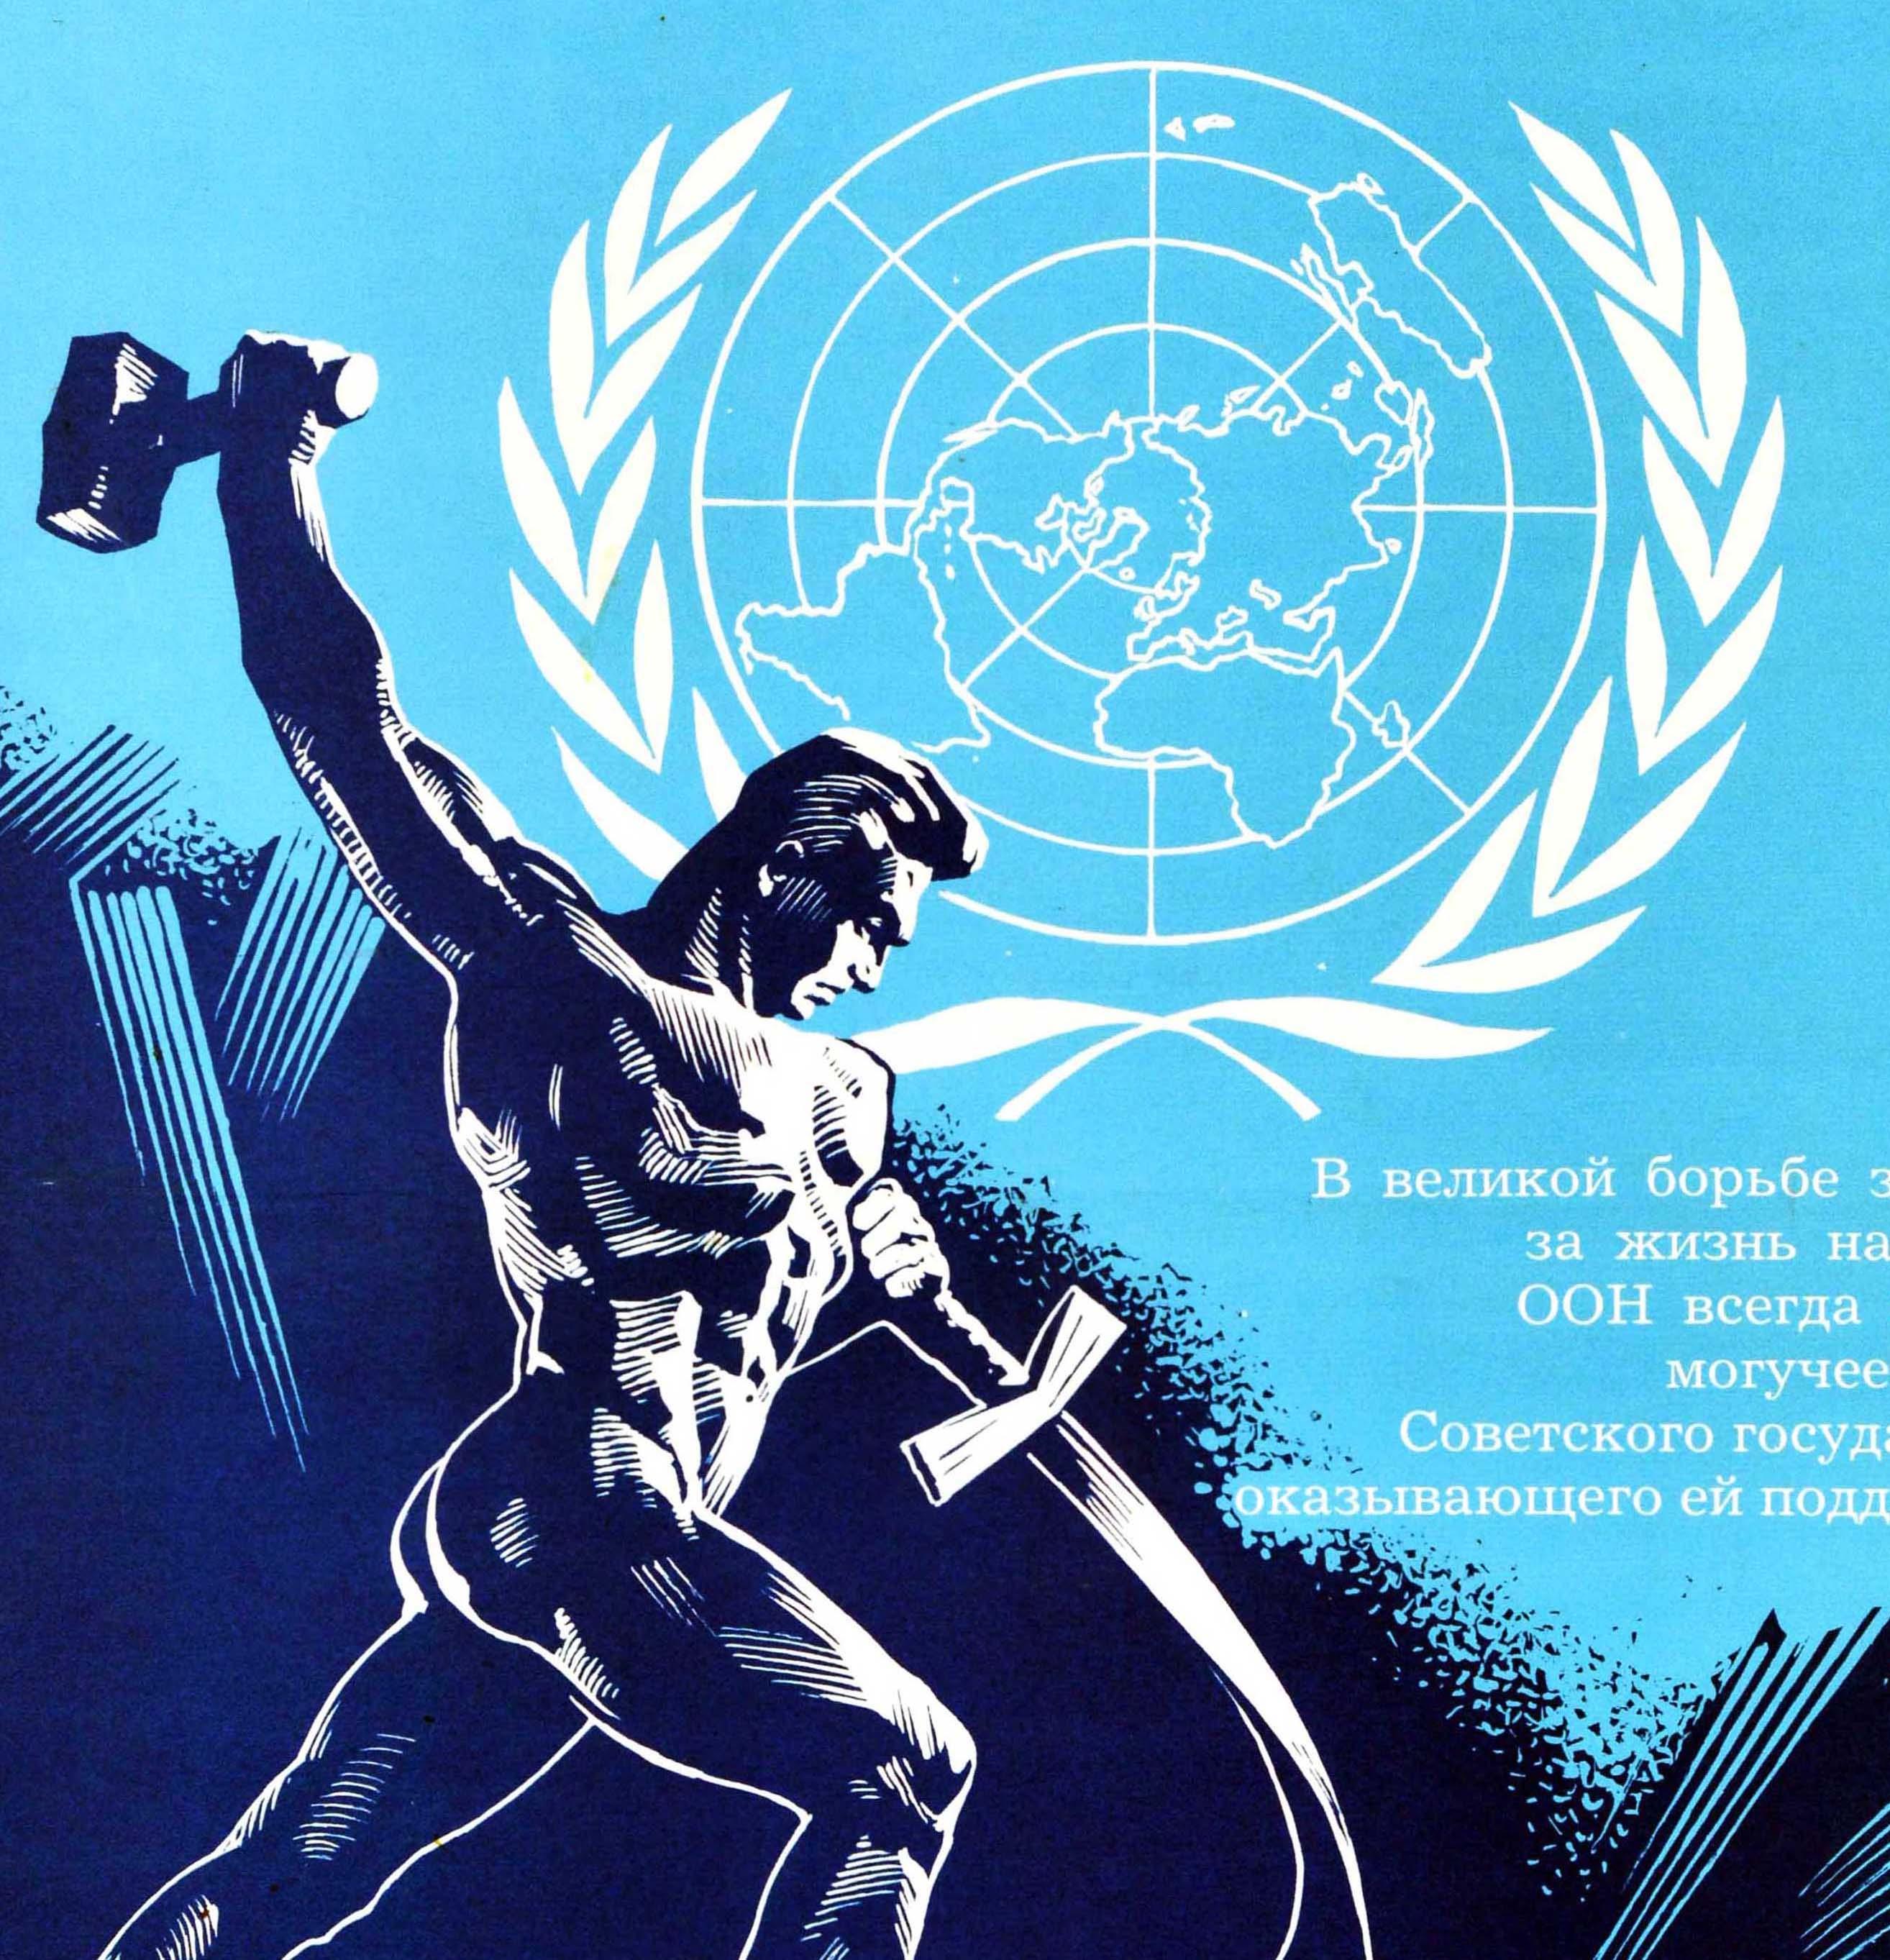 Original Vintage Soviet Poster United Nations Anniversary USSR UN Sword Plough - Print by Unknown